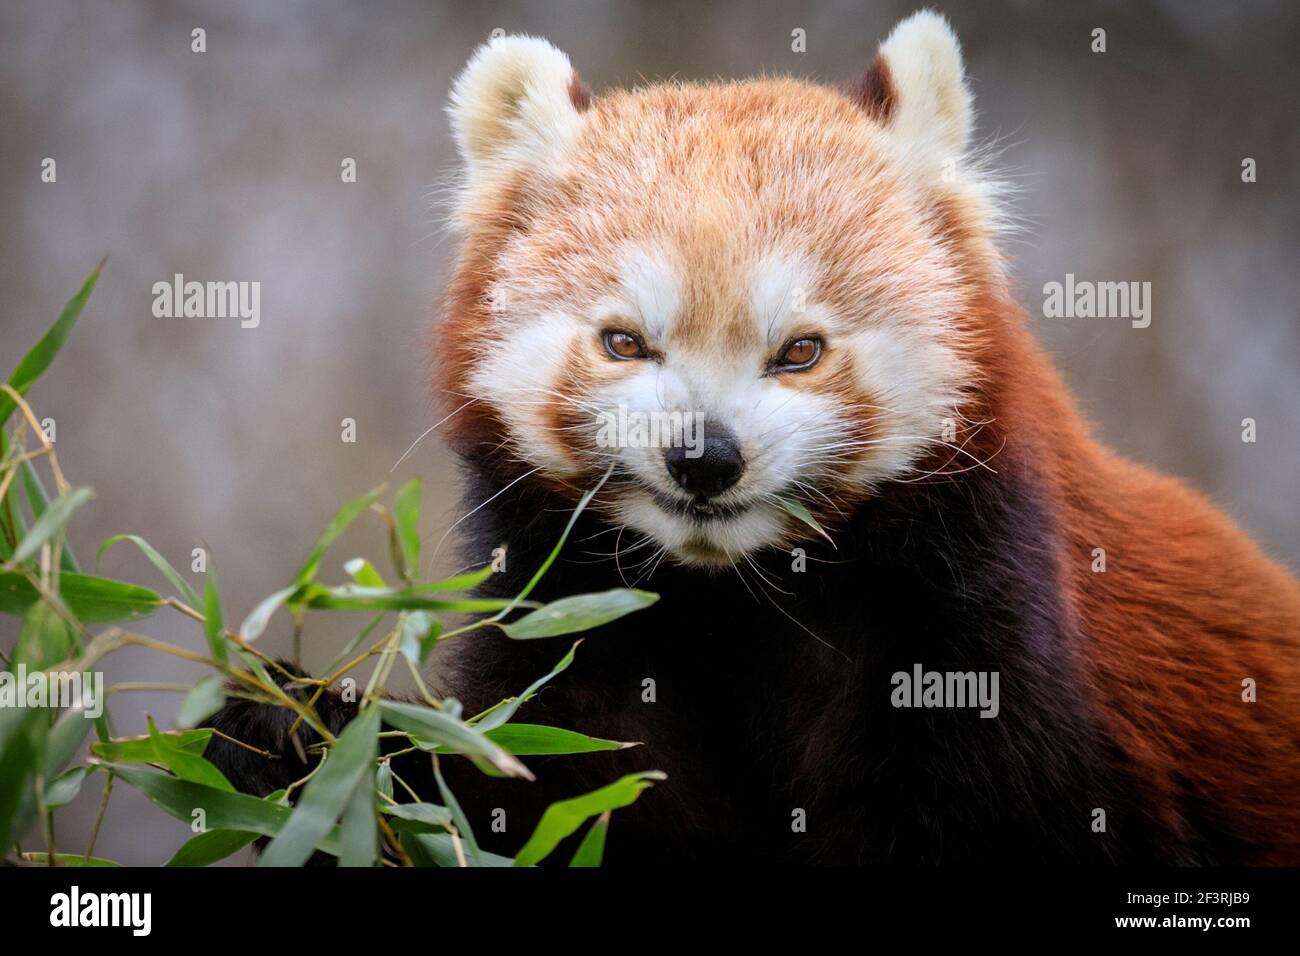 A happy looking red panda (Ailurus fulgens), an endangered species native eastern Himalayas and southwestern China, munches on bamboo, close up face Stock Photo